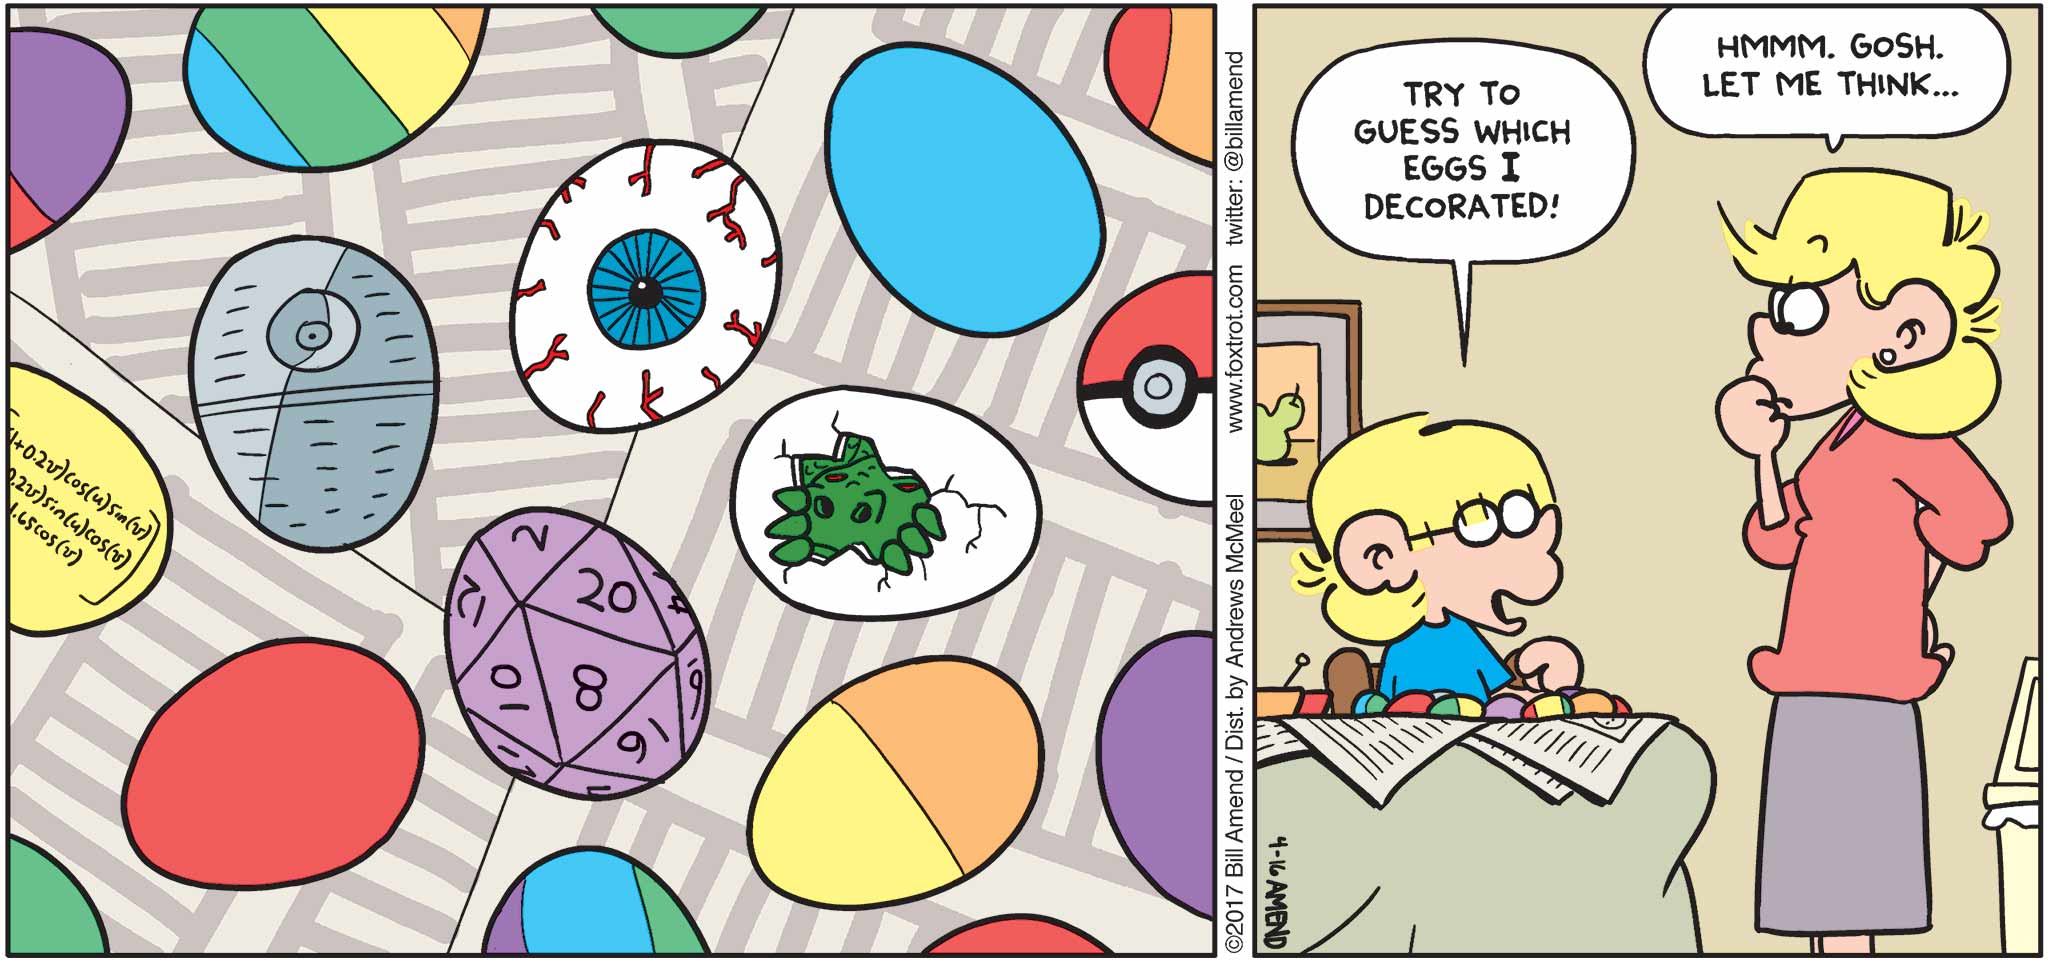 FoxTrot by Bill Amend - "Overly Easy" published April 16, 2017 - Jason says: Try to guess which eggs I decorated! Andy says: Hmmm. Gosh Let me think...